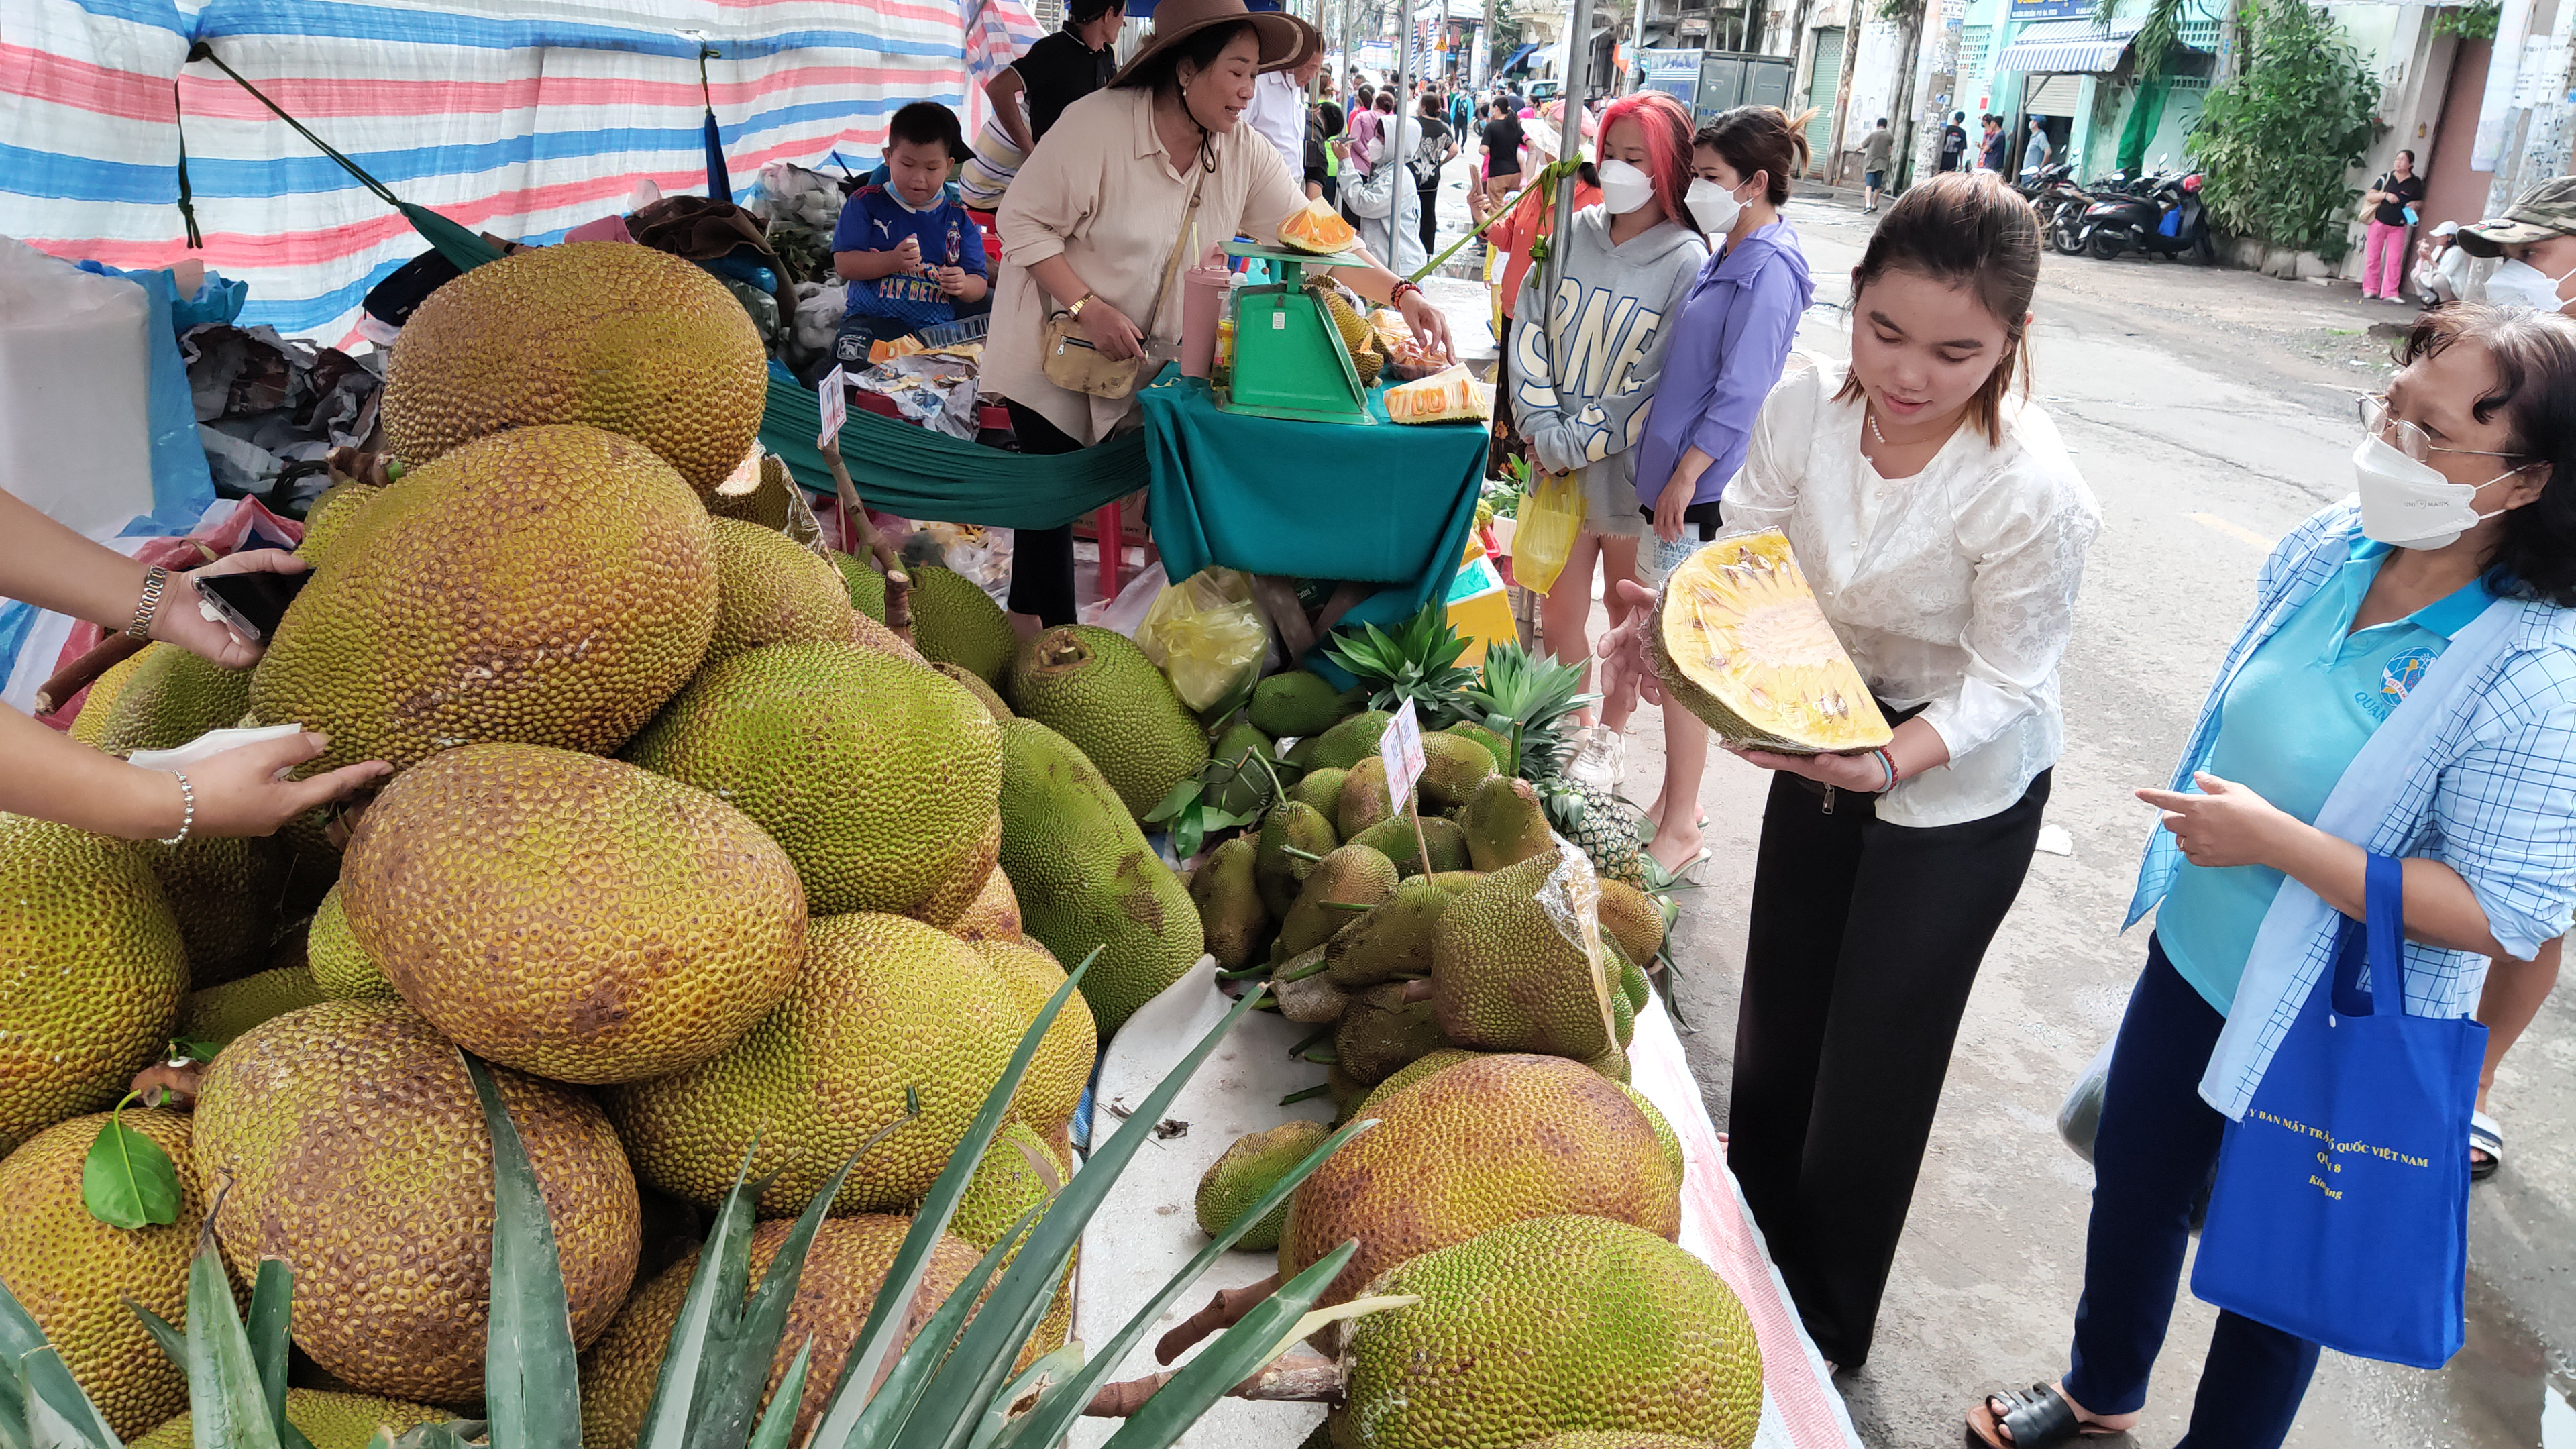 Jackfruits are sold at the ‘Tren ben duoi thuyen’ Fruit Week in District 8, Ho Chi Minh City, May 28, 2022. Photo: N.Tri / Tuoi Tre